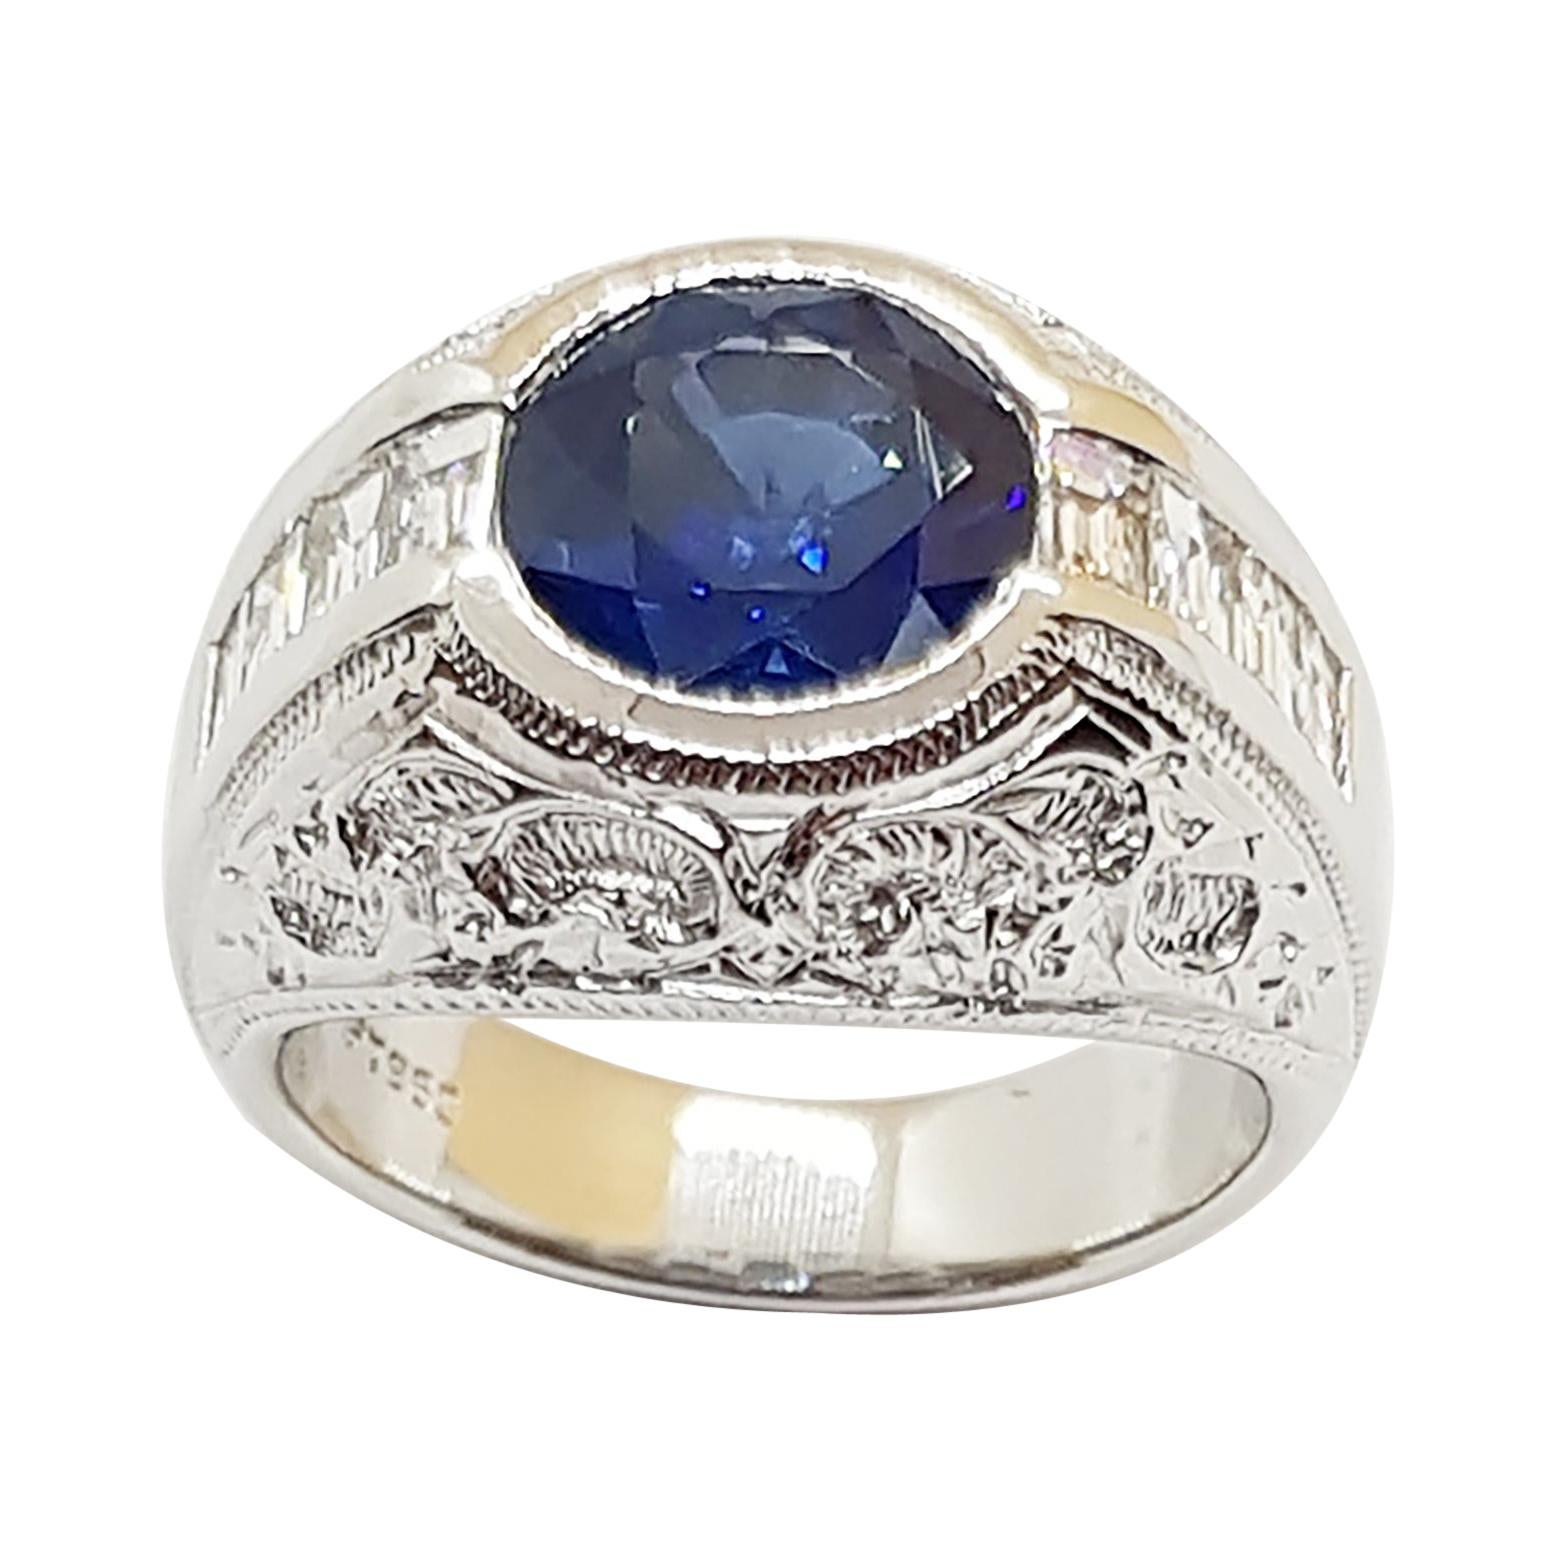 Round Cut Blue Sapphire, Diamond with Engraving Ring Set in Platinum 950 For Sale